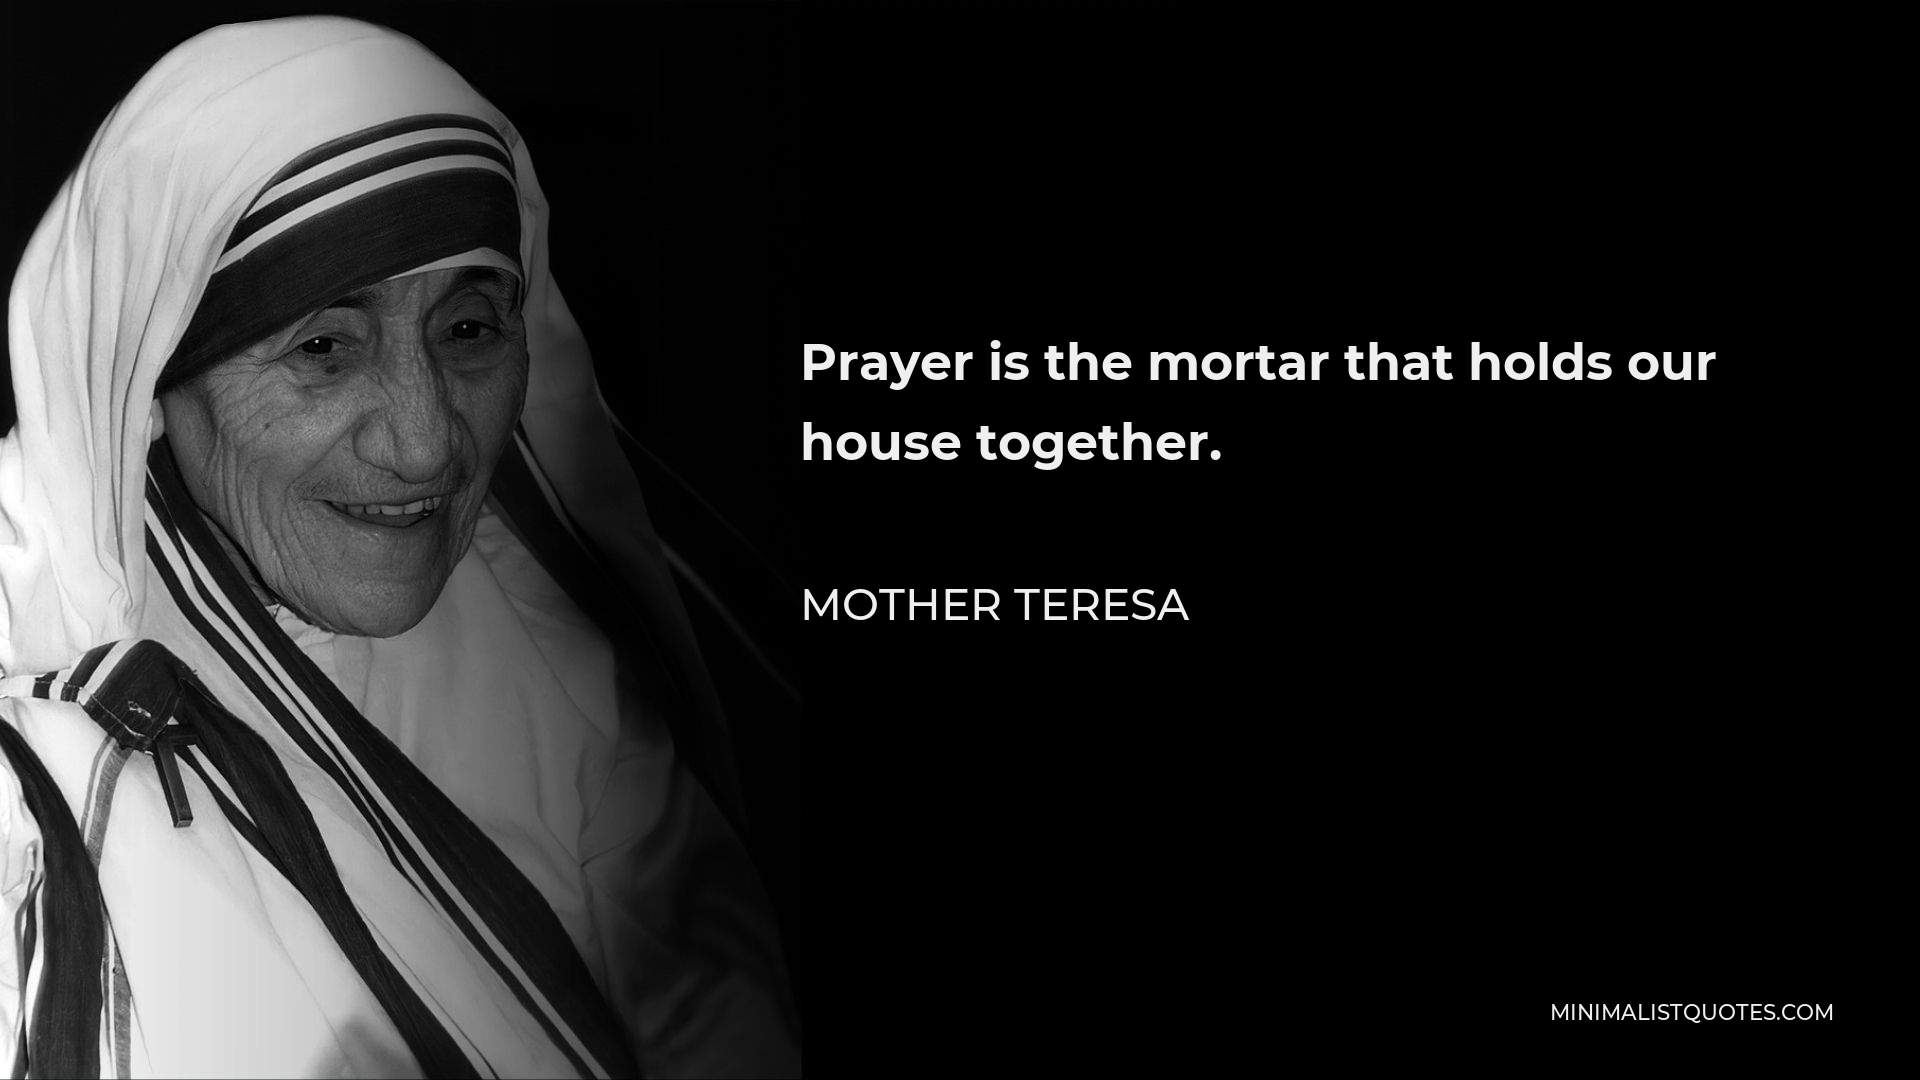 Mother Teresa Quote - Prayer is the mortar that holds our house together.